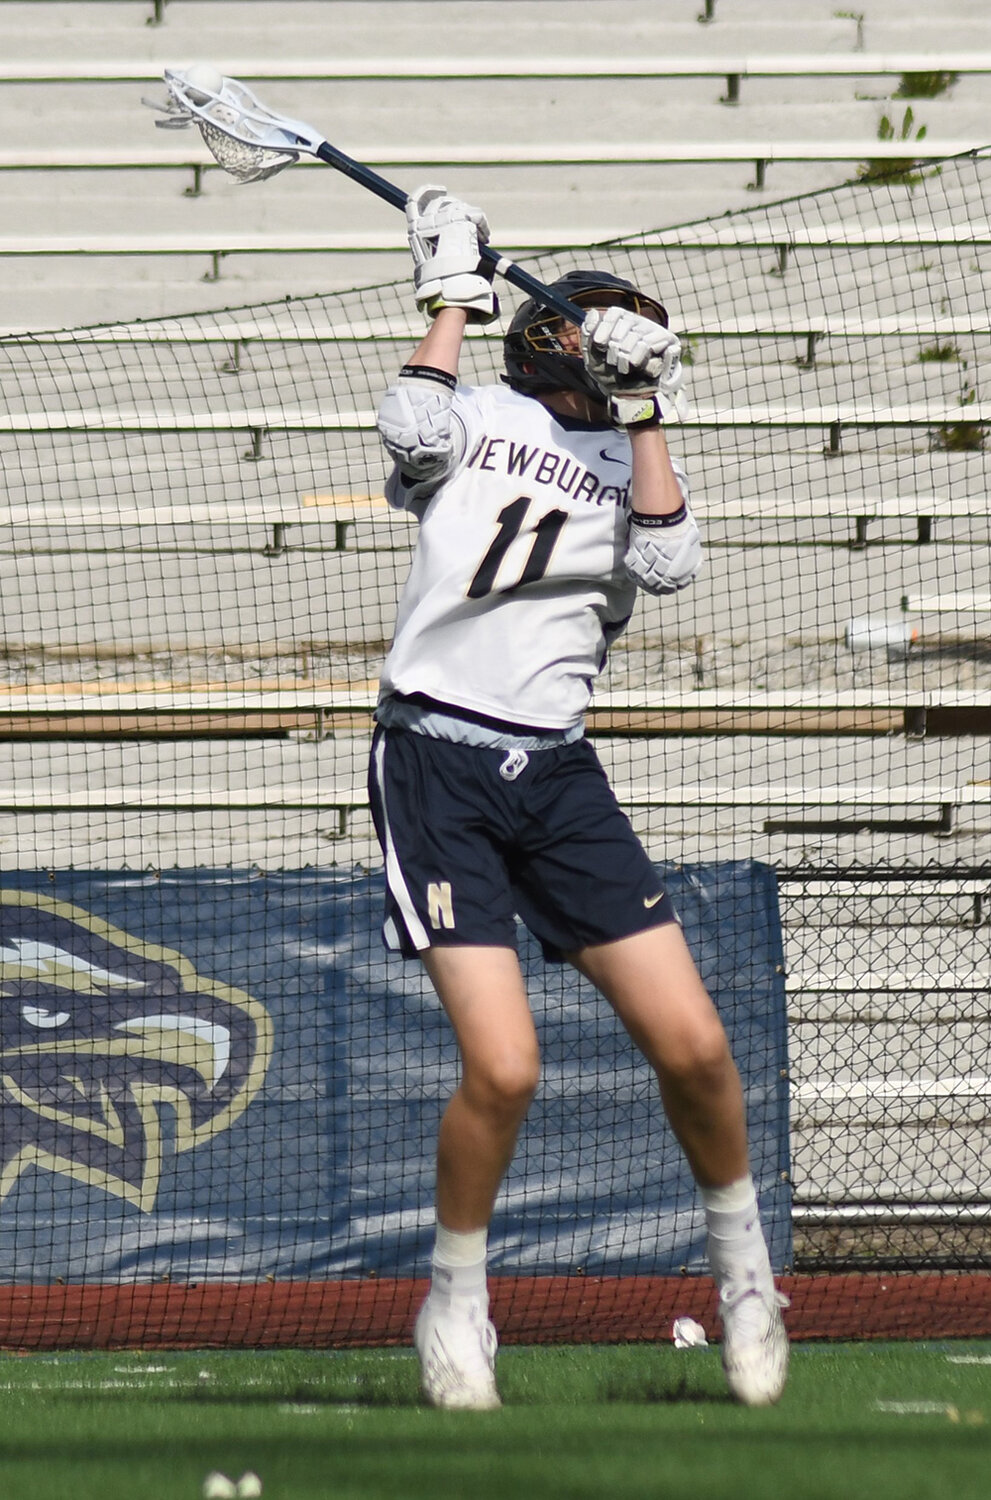 Newburgh's Sam Esposito shoots the ball during Friday's Section 9 boys' lacrosse game at Academy Field in Newburgh.